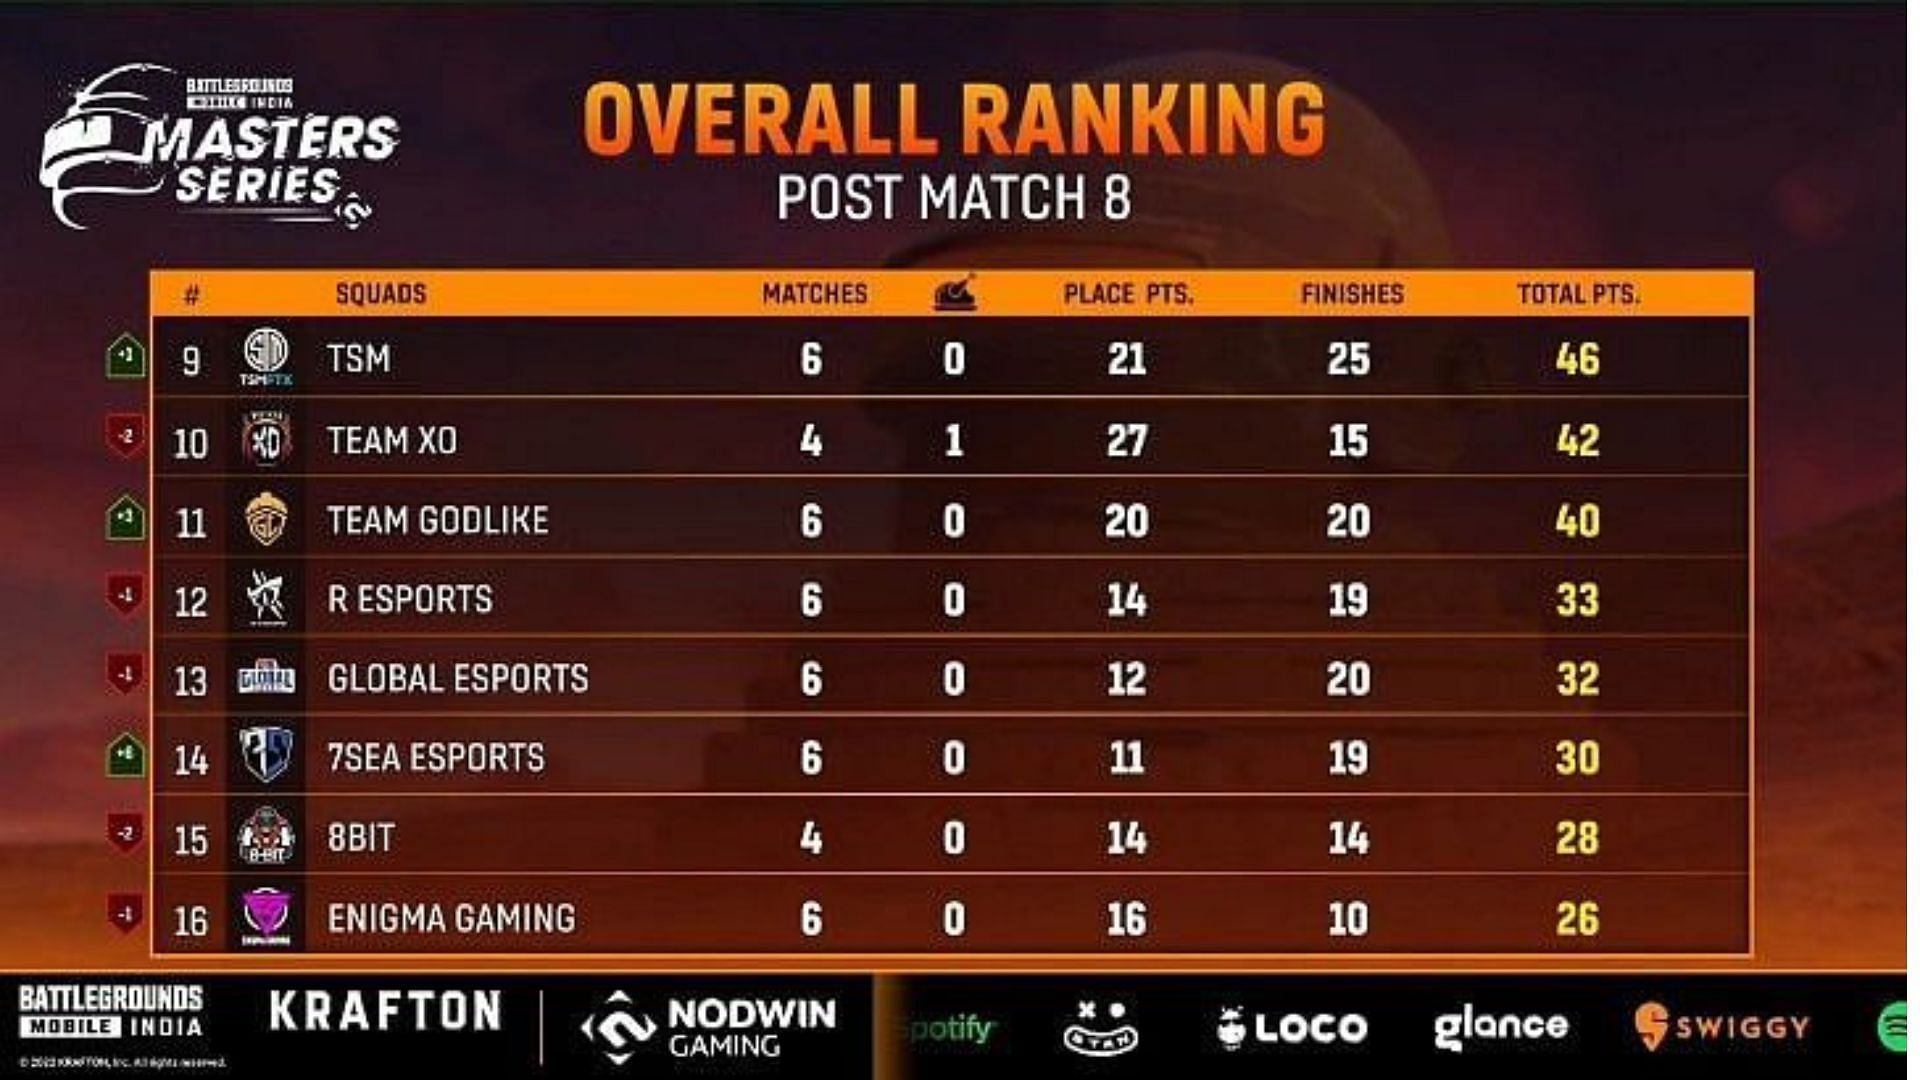 Godlike placed 11th after BGMI Masters Series Day 2 (image via Loco)